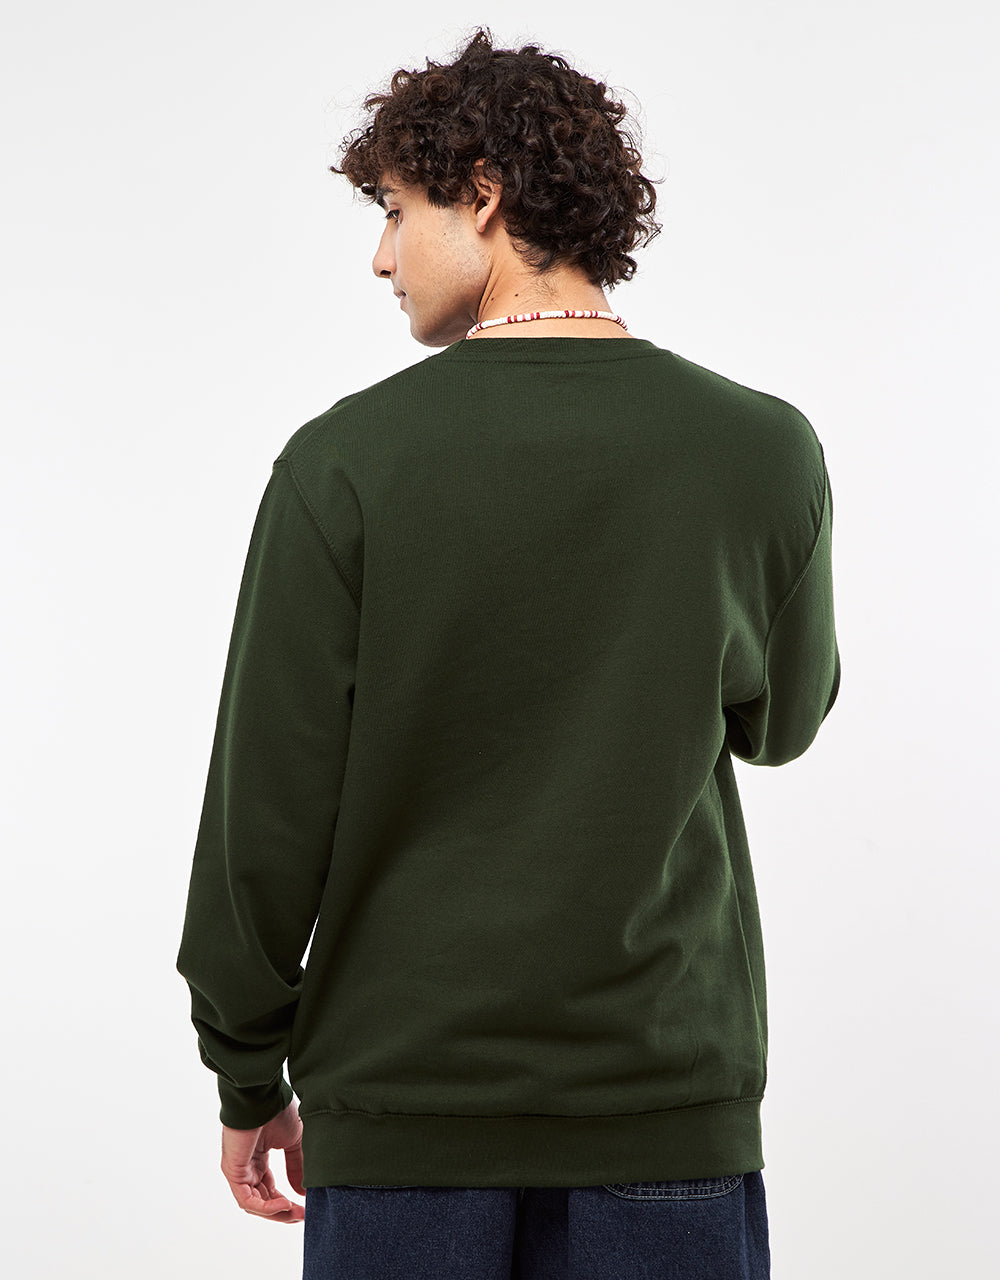 Route One Fluidity Sweatshirt - Forest Green